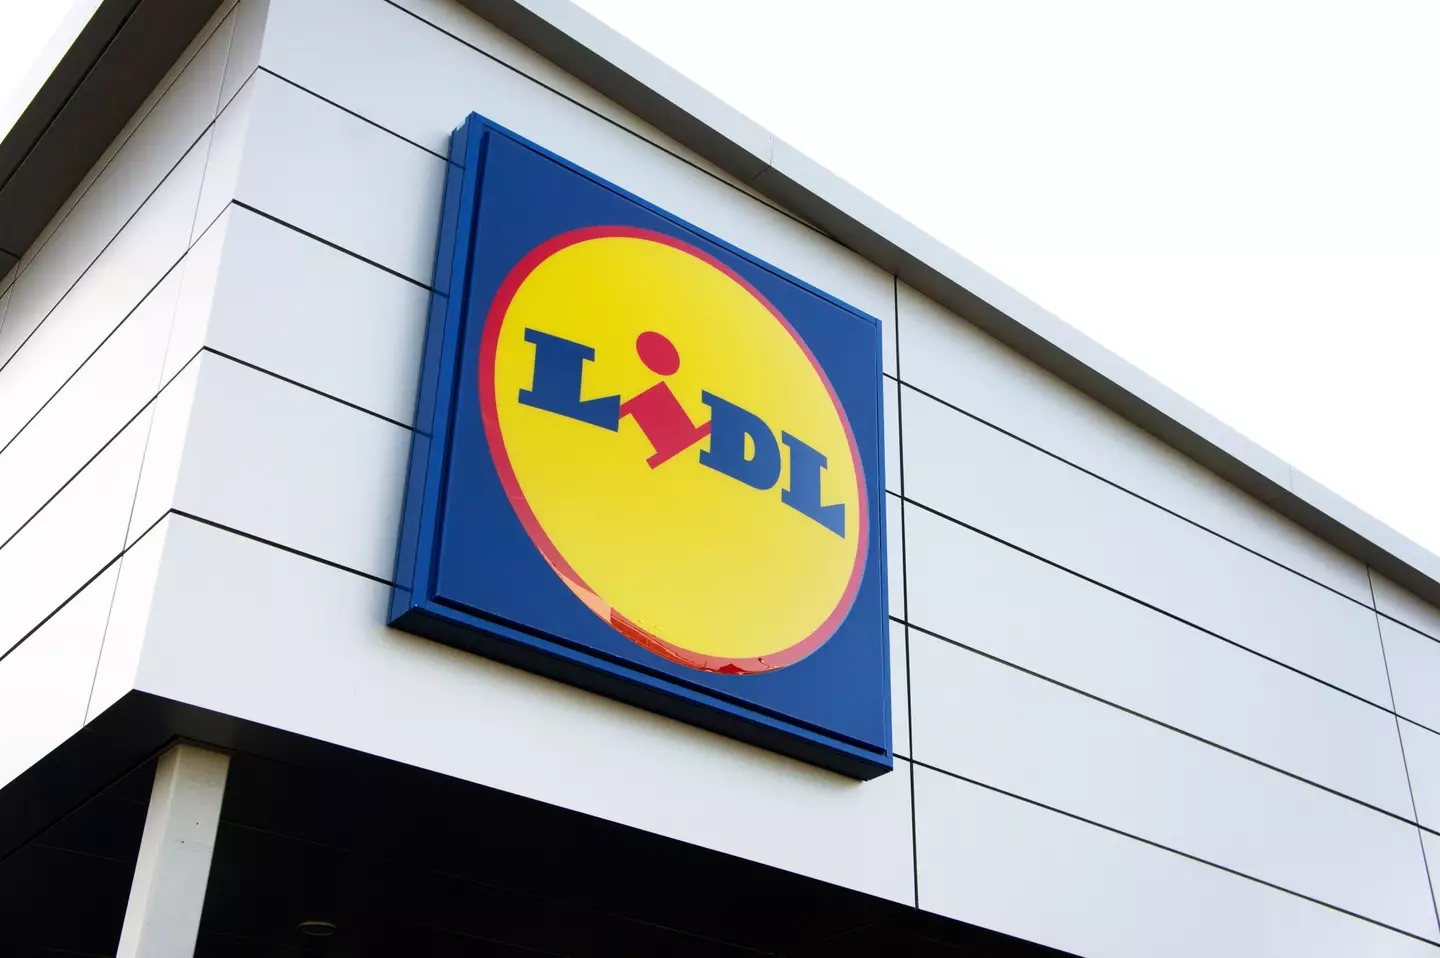 Aldi has apologised after a mother and daughter were left 'humiliated' by a male cashier when buying period products in a Somerset supermarket.